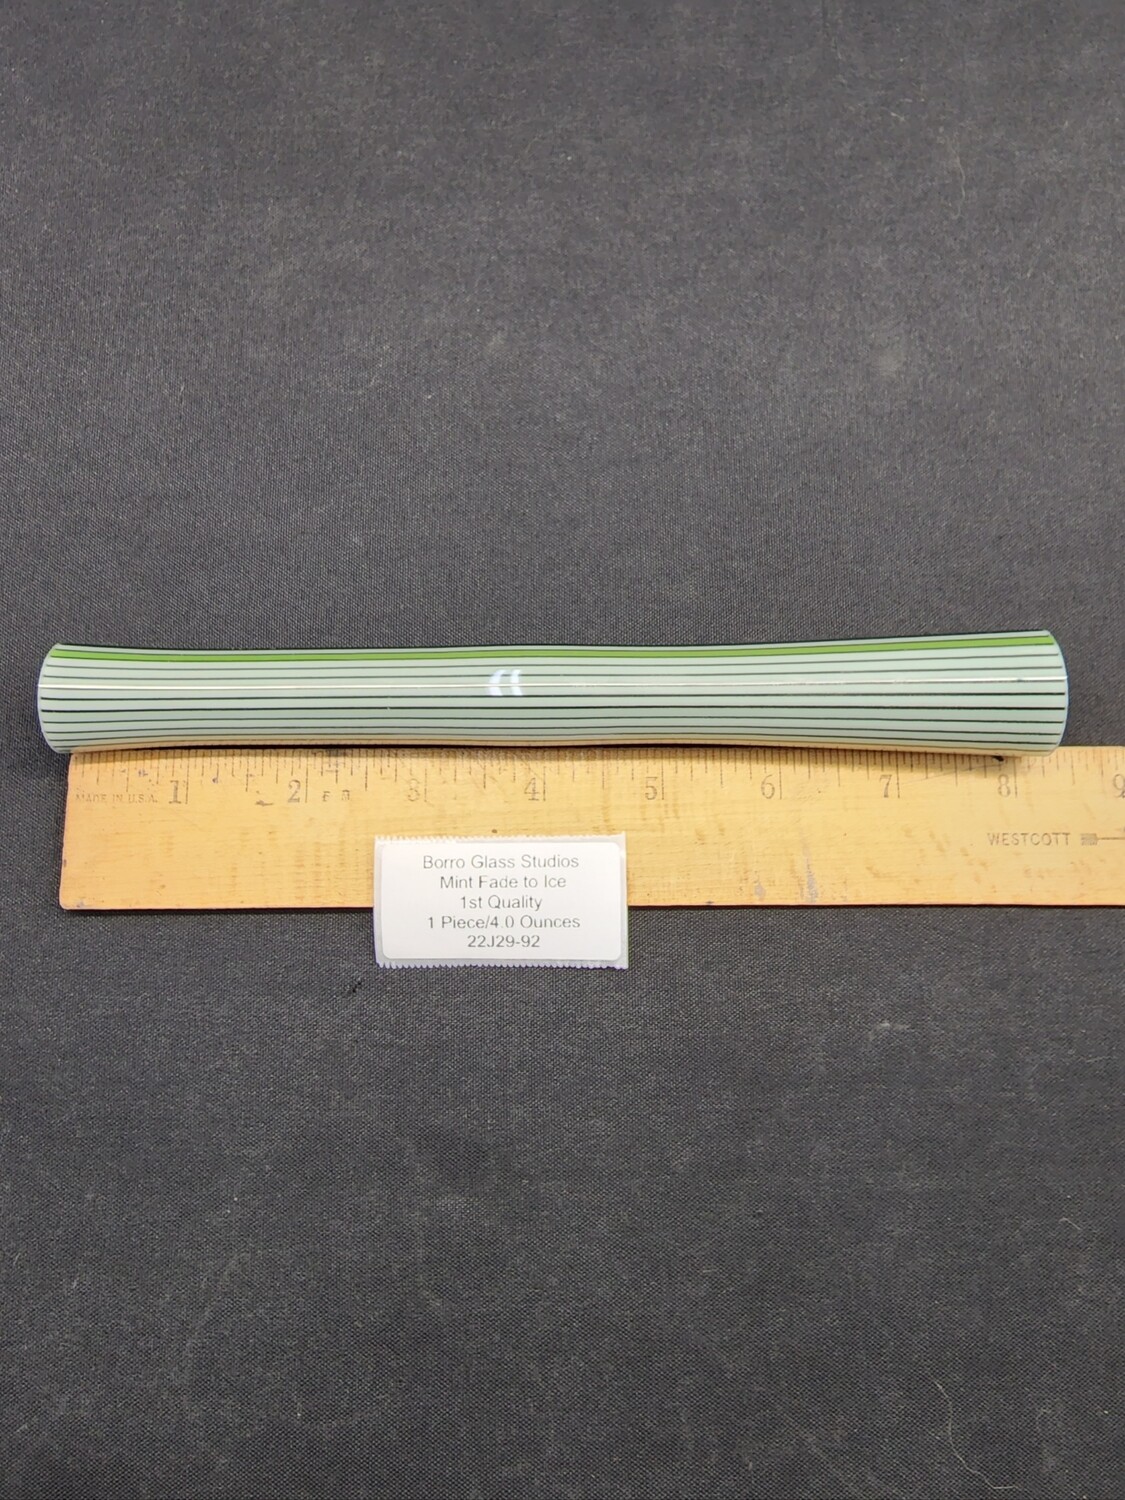 Mint Fade to Ice Boro Vac Stacked Line Tubing - 1st Quality - 4.0 Ounces